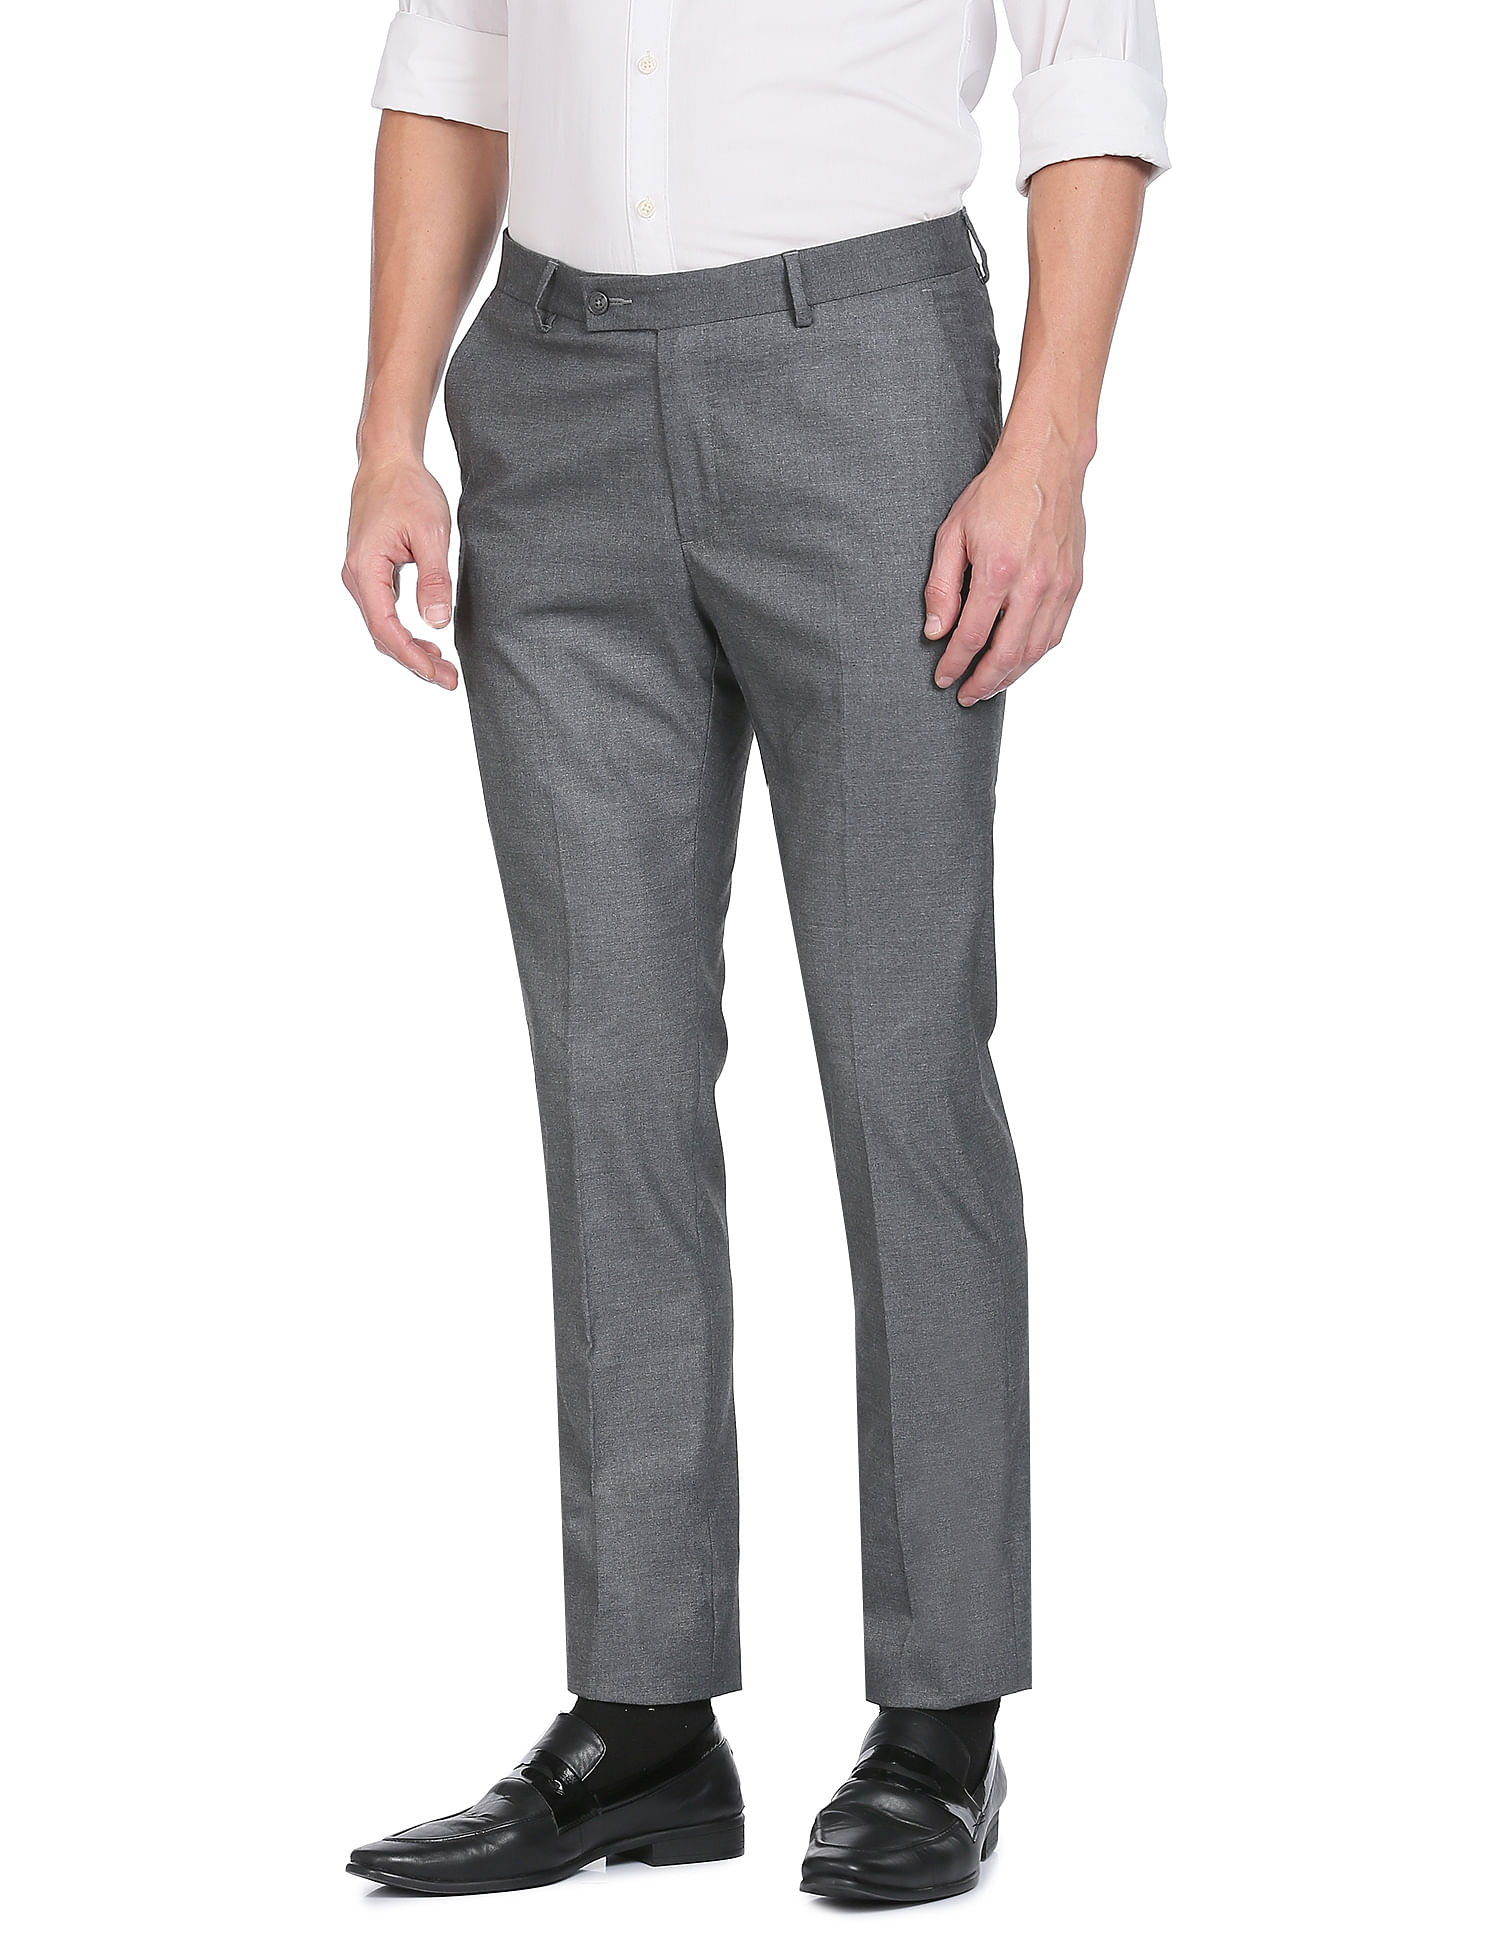 Buy Men's Ice-grey Colour Formal Trouser Online at Best Prices in India -  JioMart.